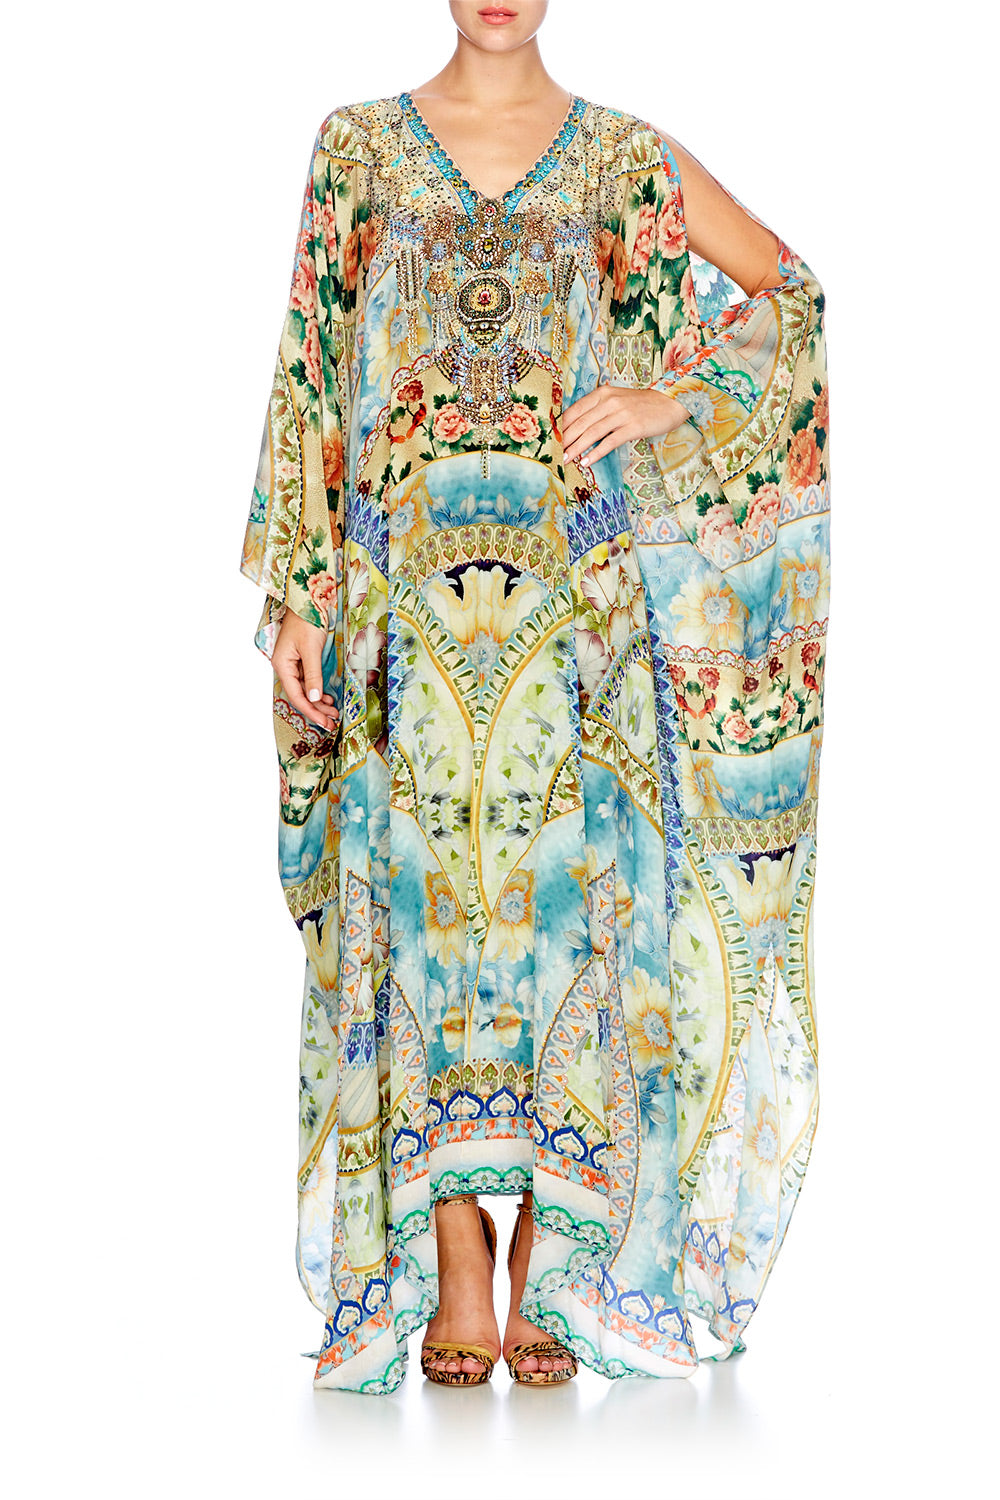 SIGN OF PEACE SPLIT FRONT AND SLEEVE KAFTAN